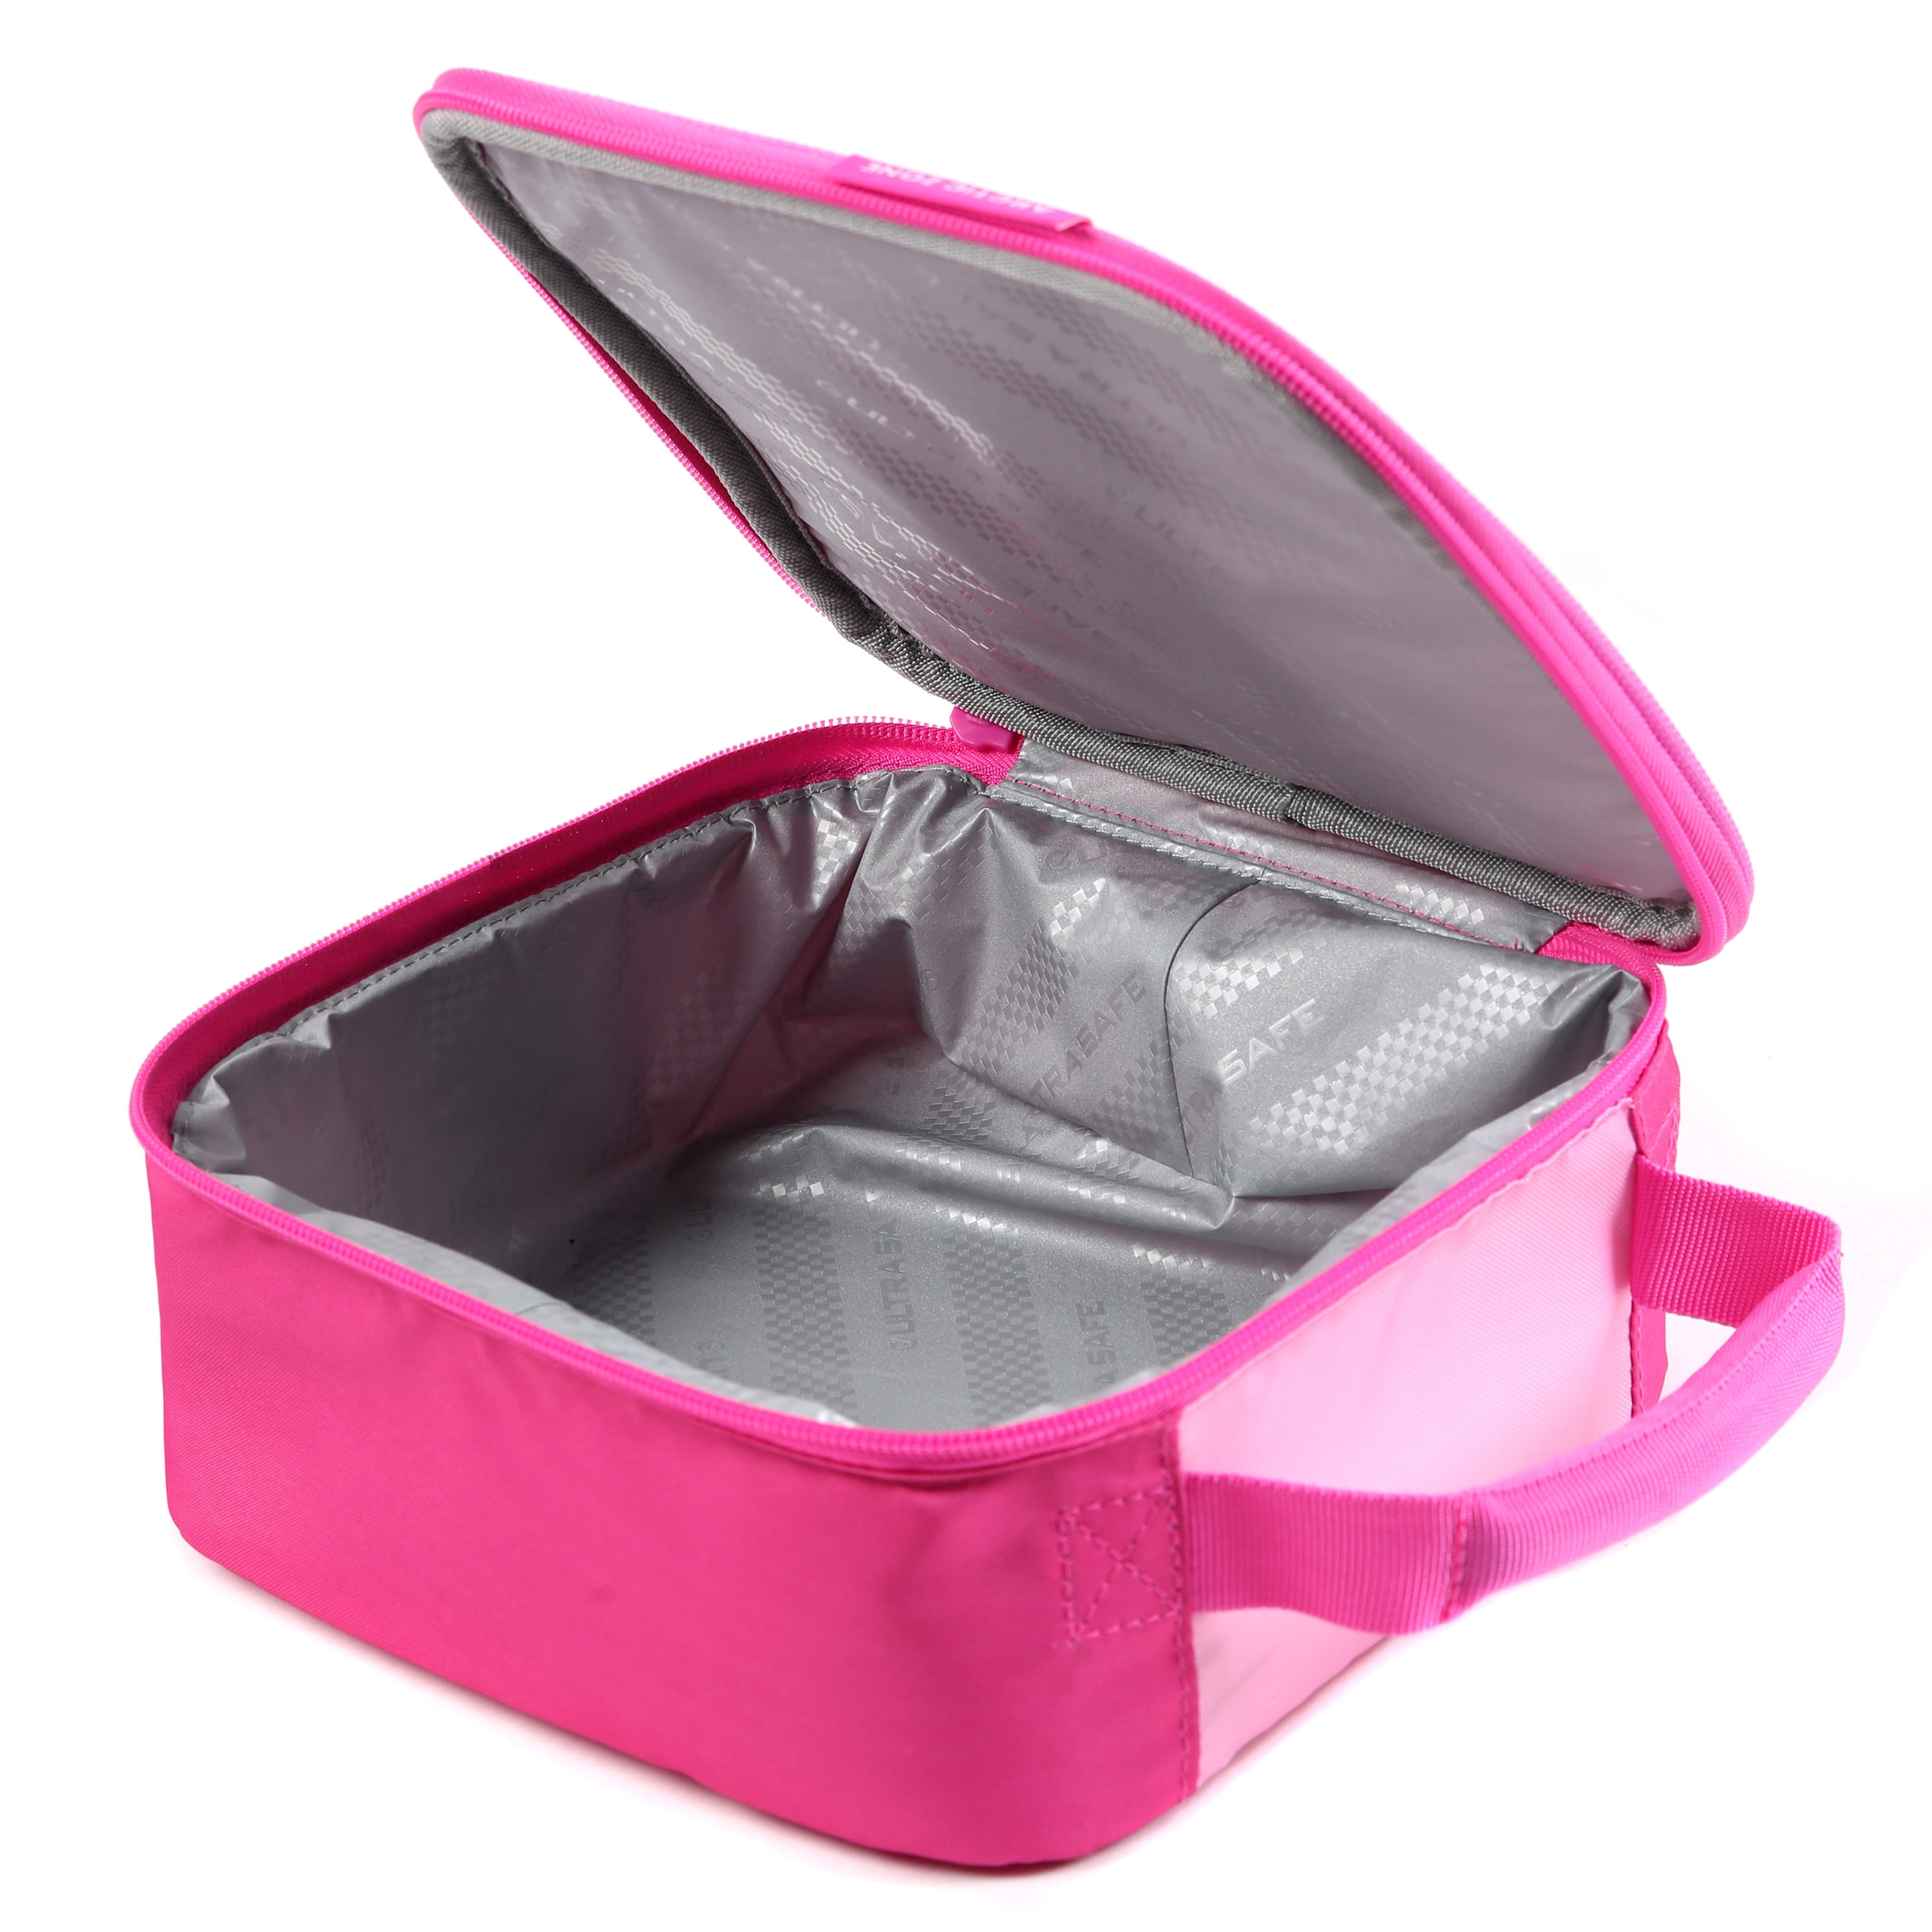 Lock And Lock Slim Lunch Box With EcoBag, Pink